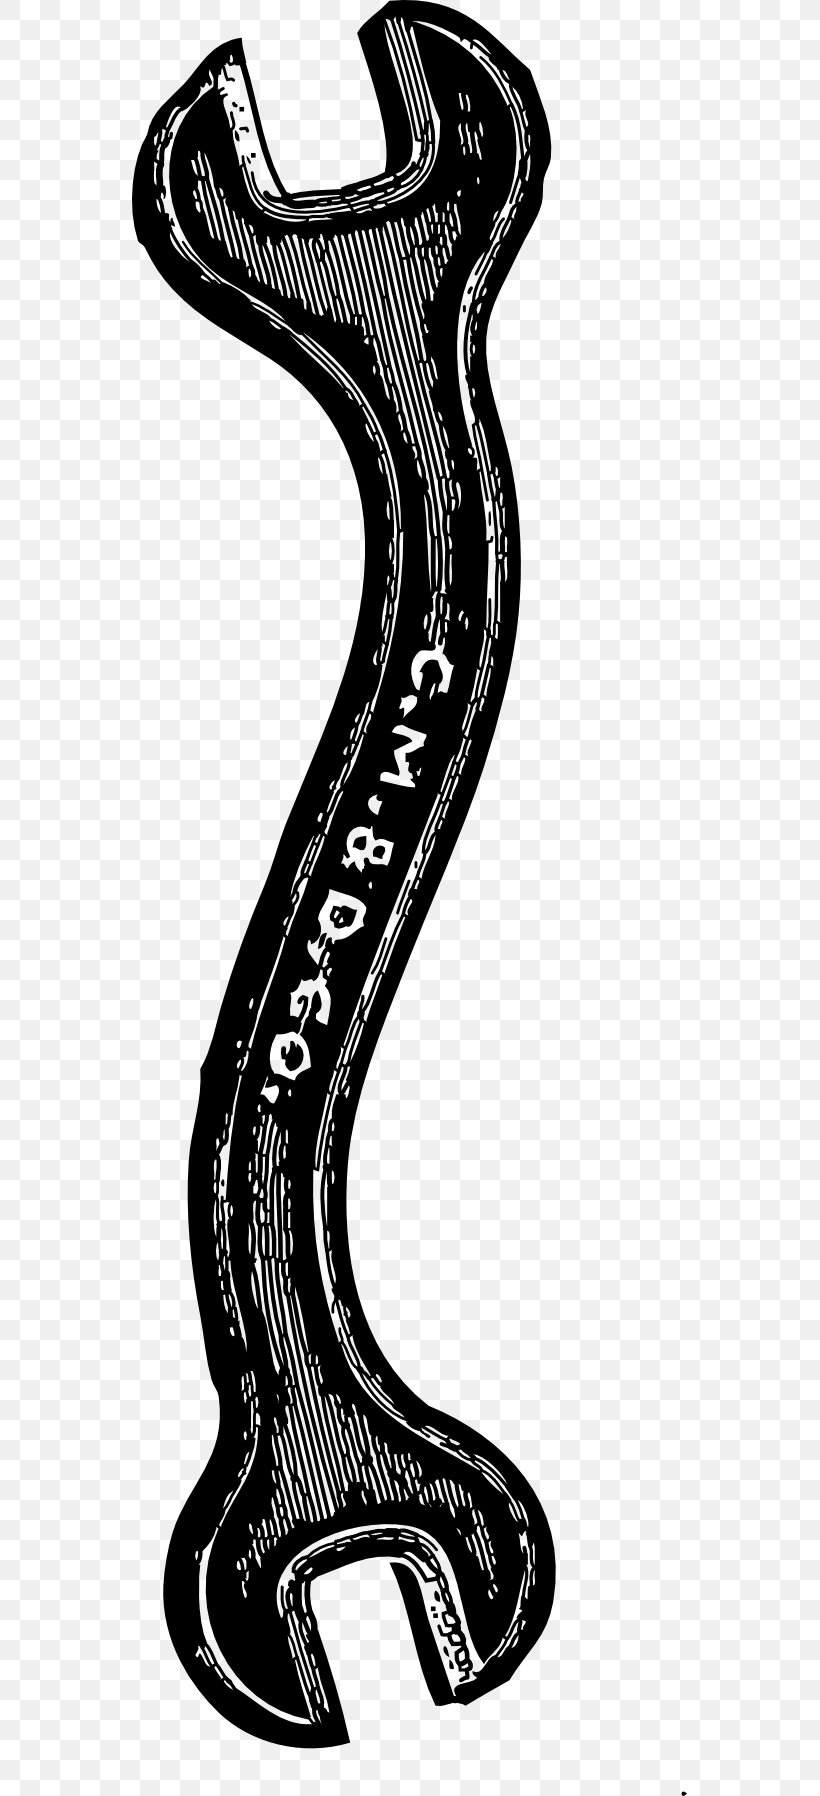 Spanners Adjustable Spanner Tool Clip Art, PNG, 555x1796px, Spanners, Adjustable Spanner, Black And White, Monochrome, Monochrome Photography Download Free